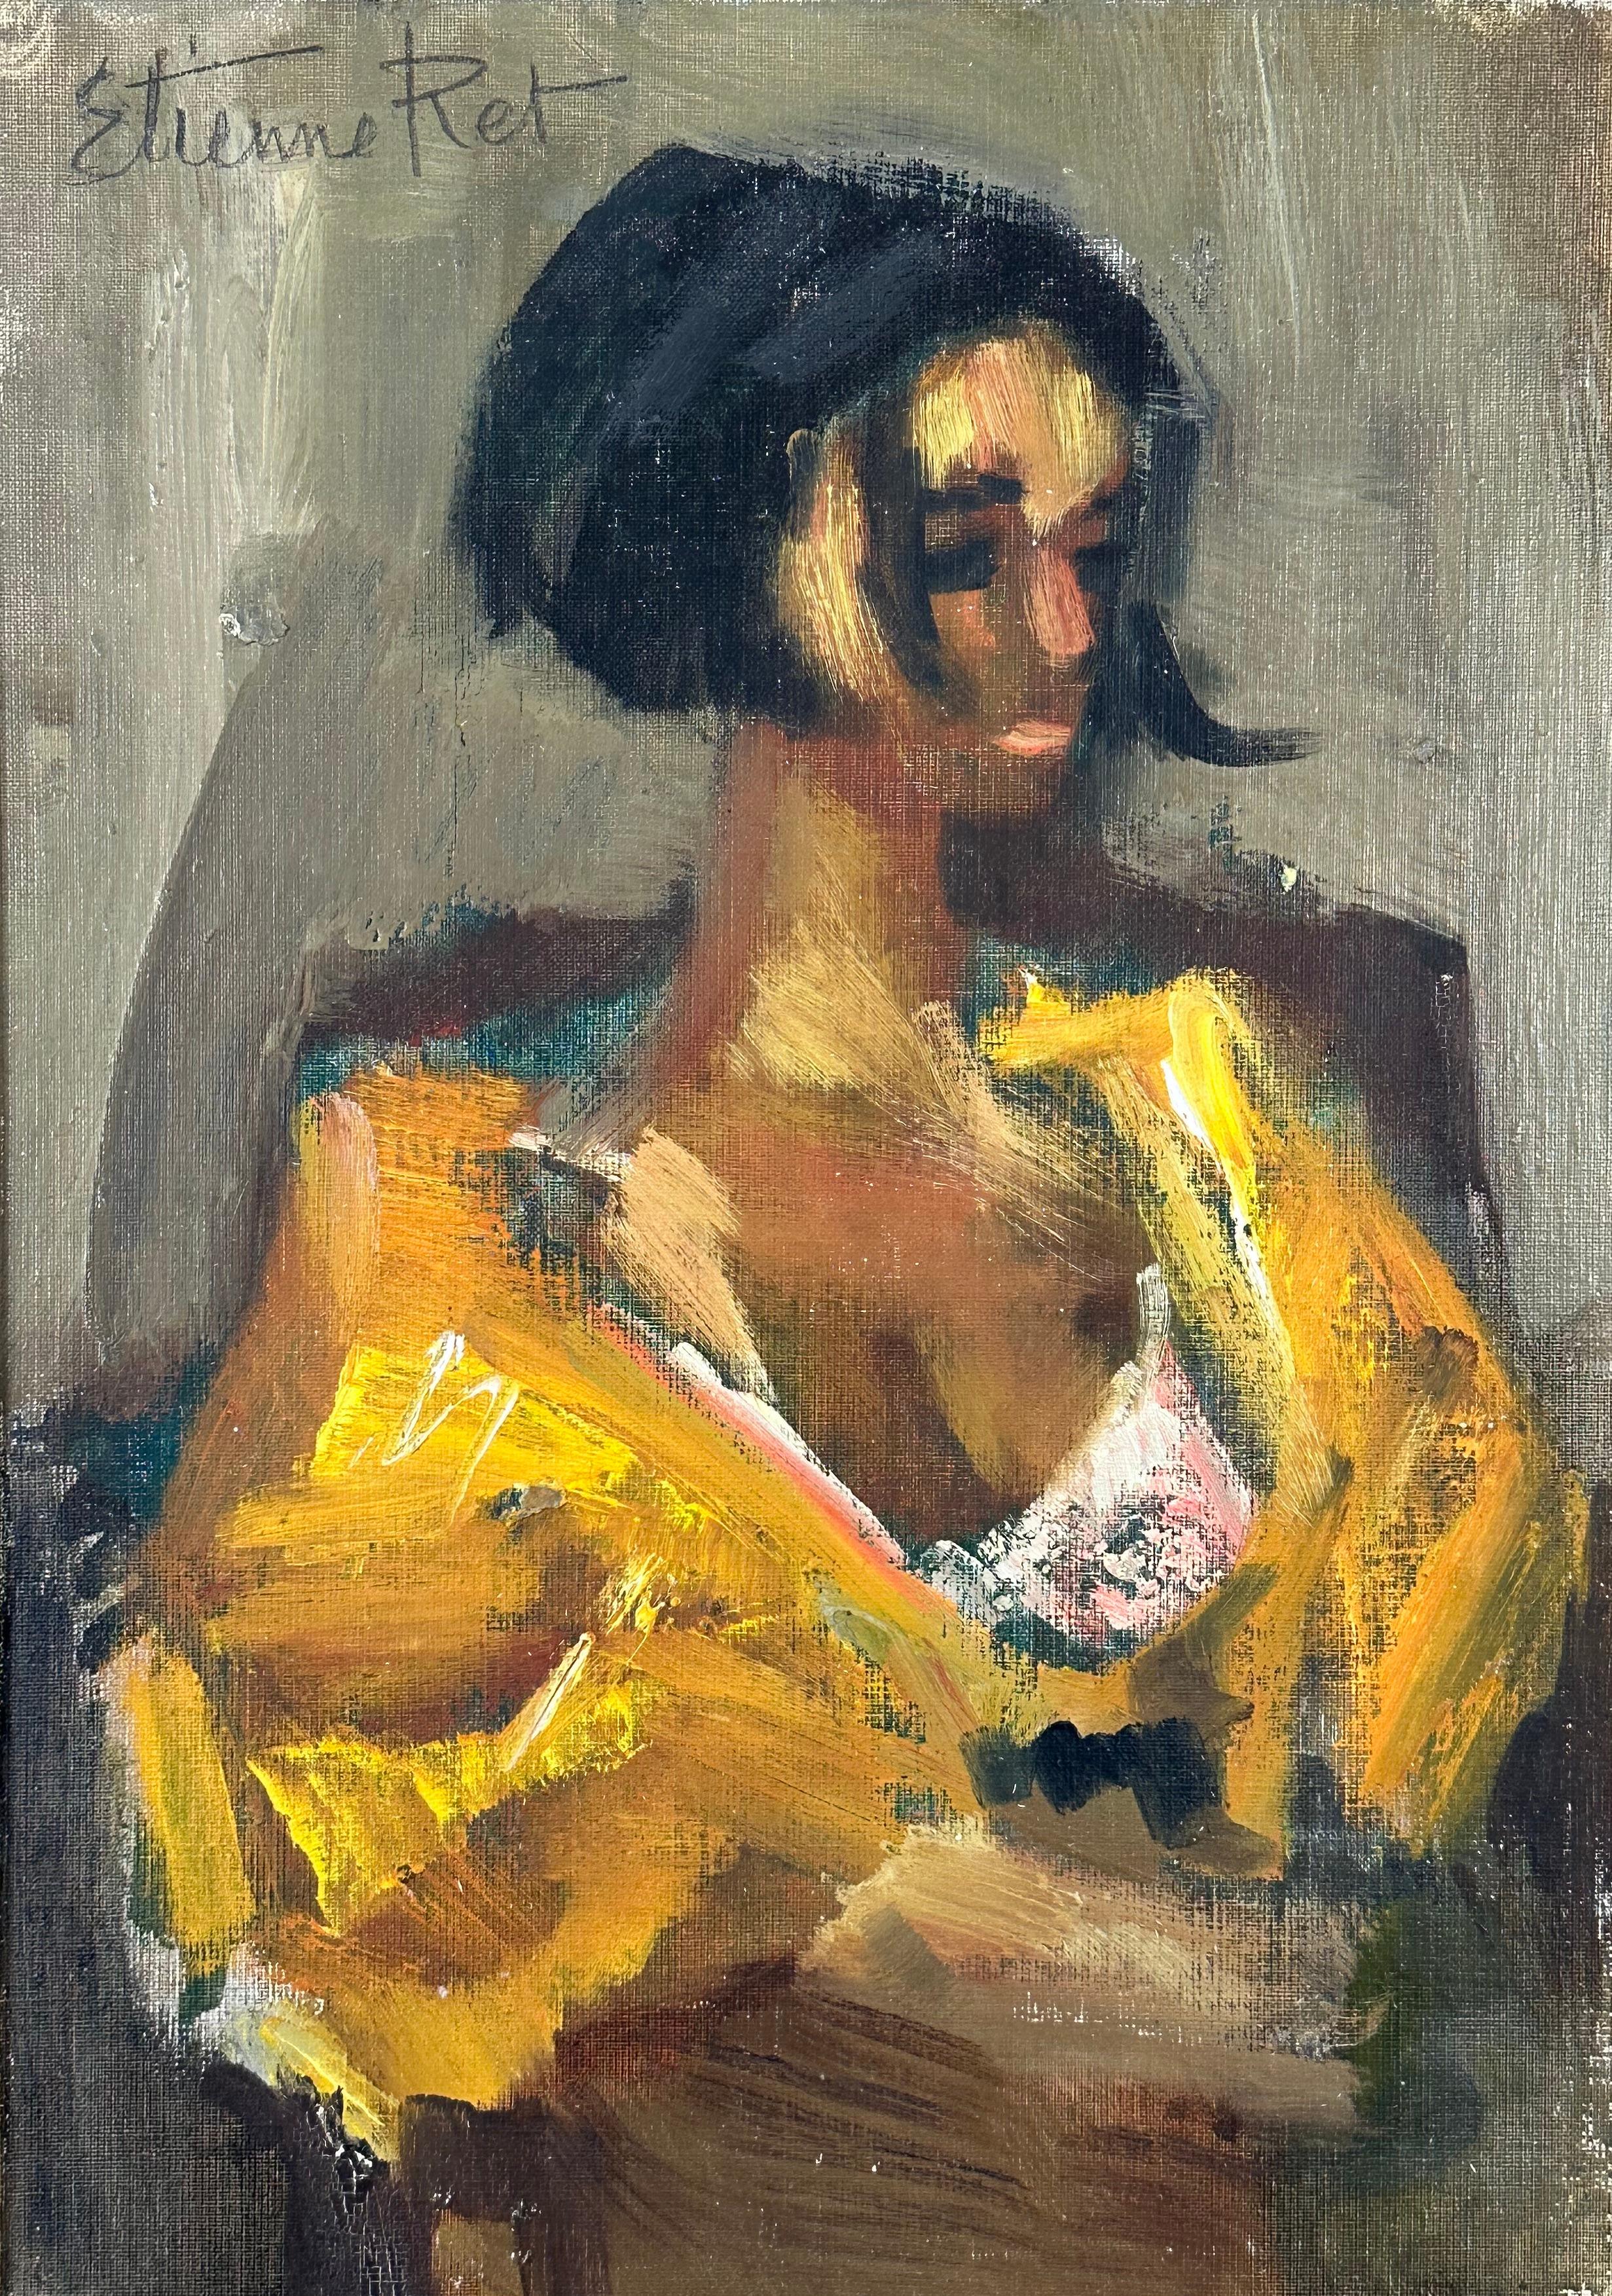 Portrait of a Young Woman - Painting by Etienne Ret